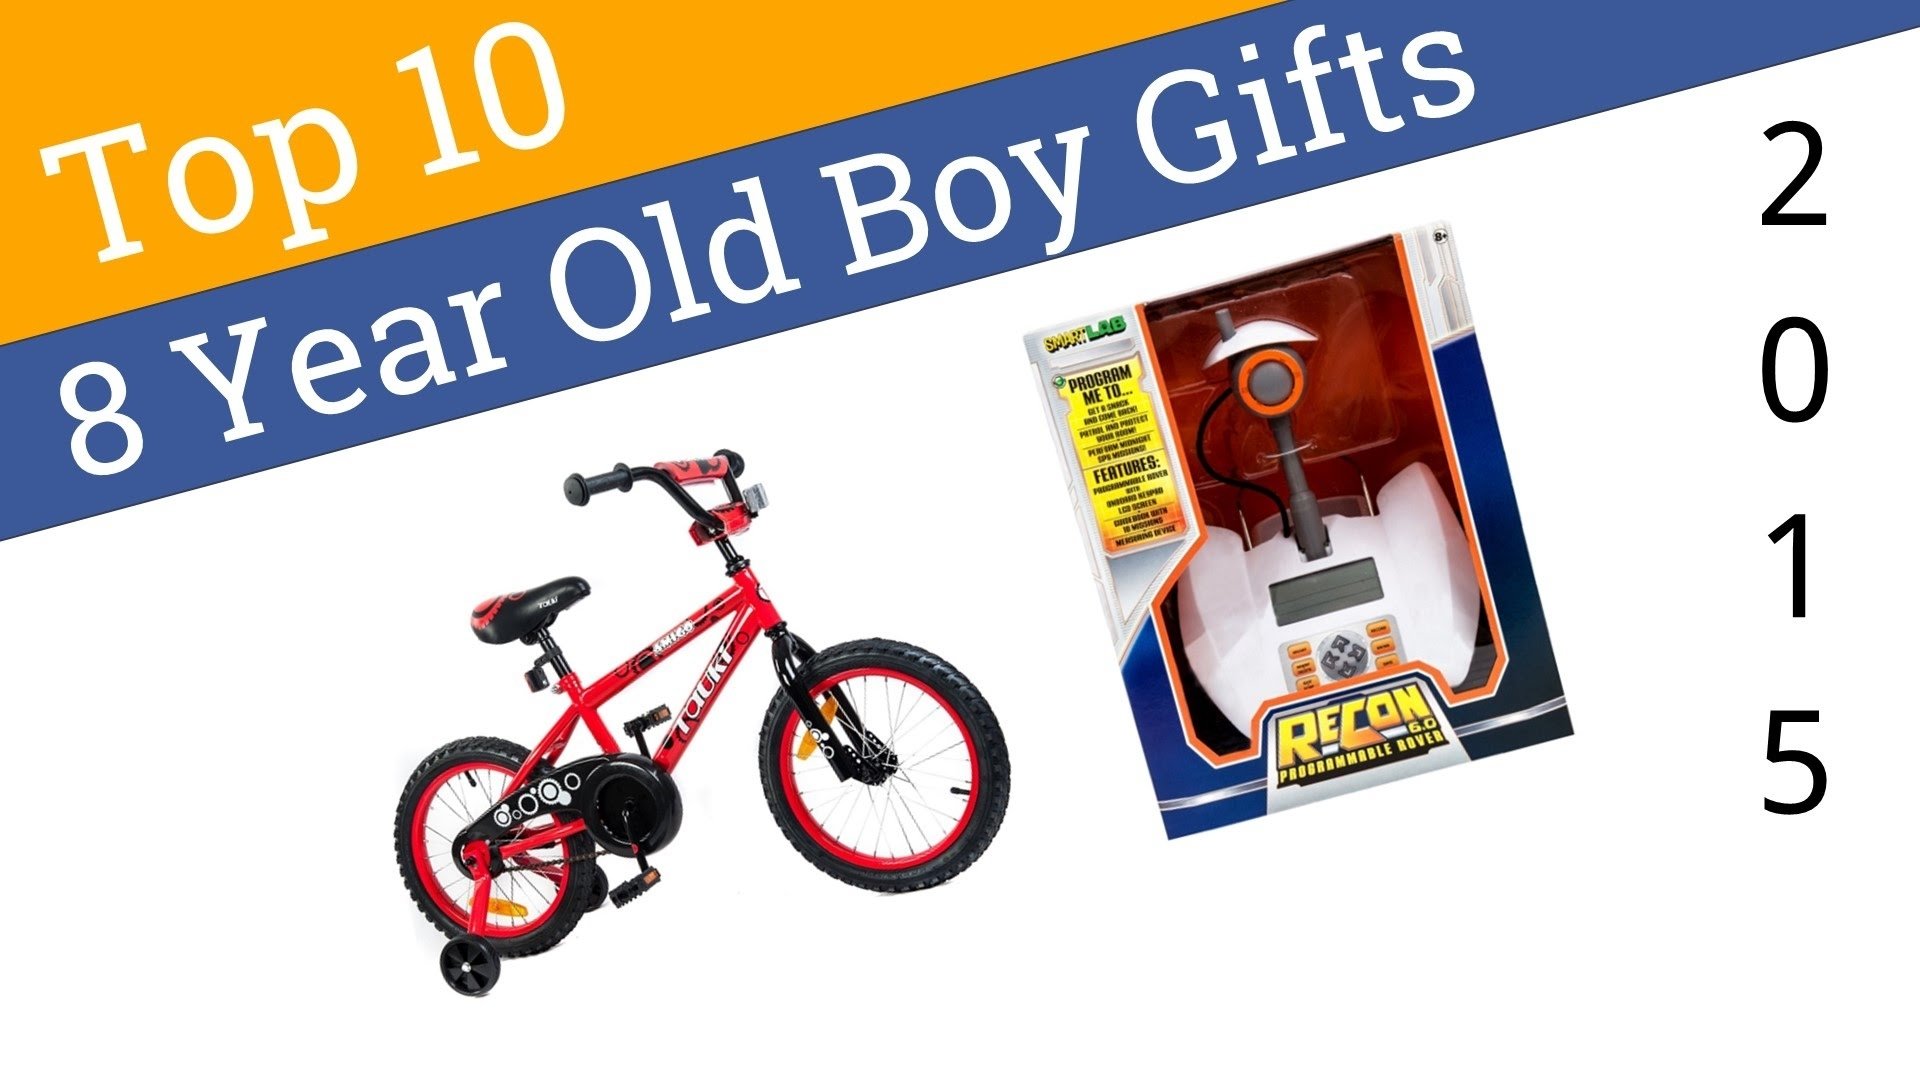 10 Great Christmas Gift Ideas For 8 Year Old Boy 10 best 8 year old boy gifts 2015 youtube 6 2022